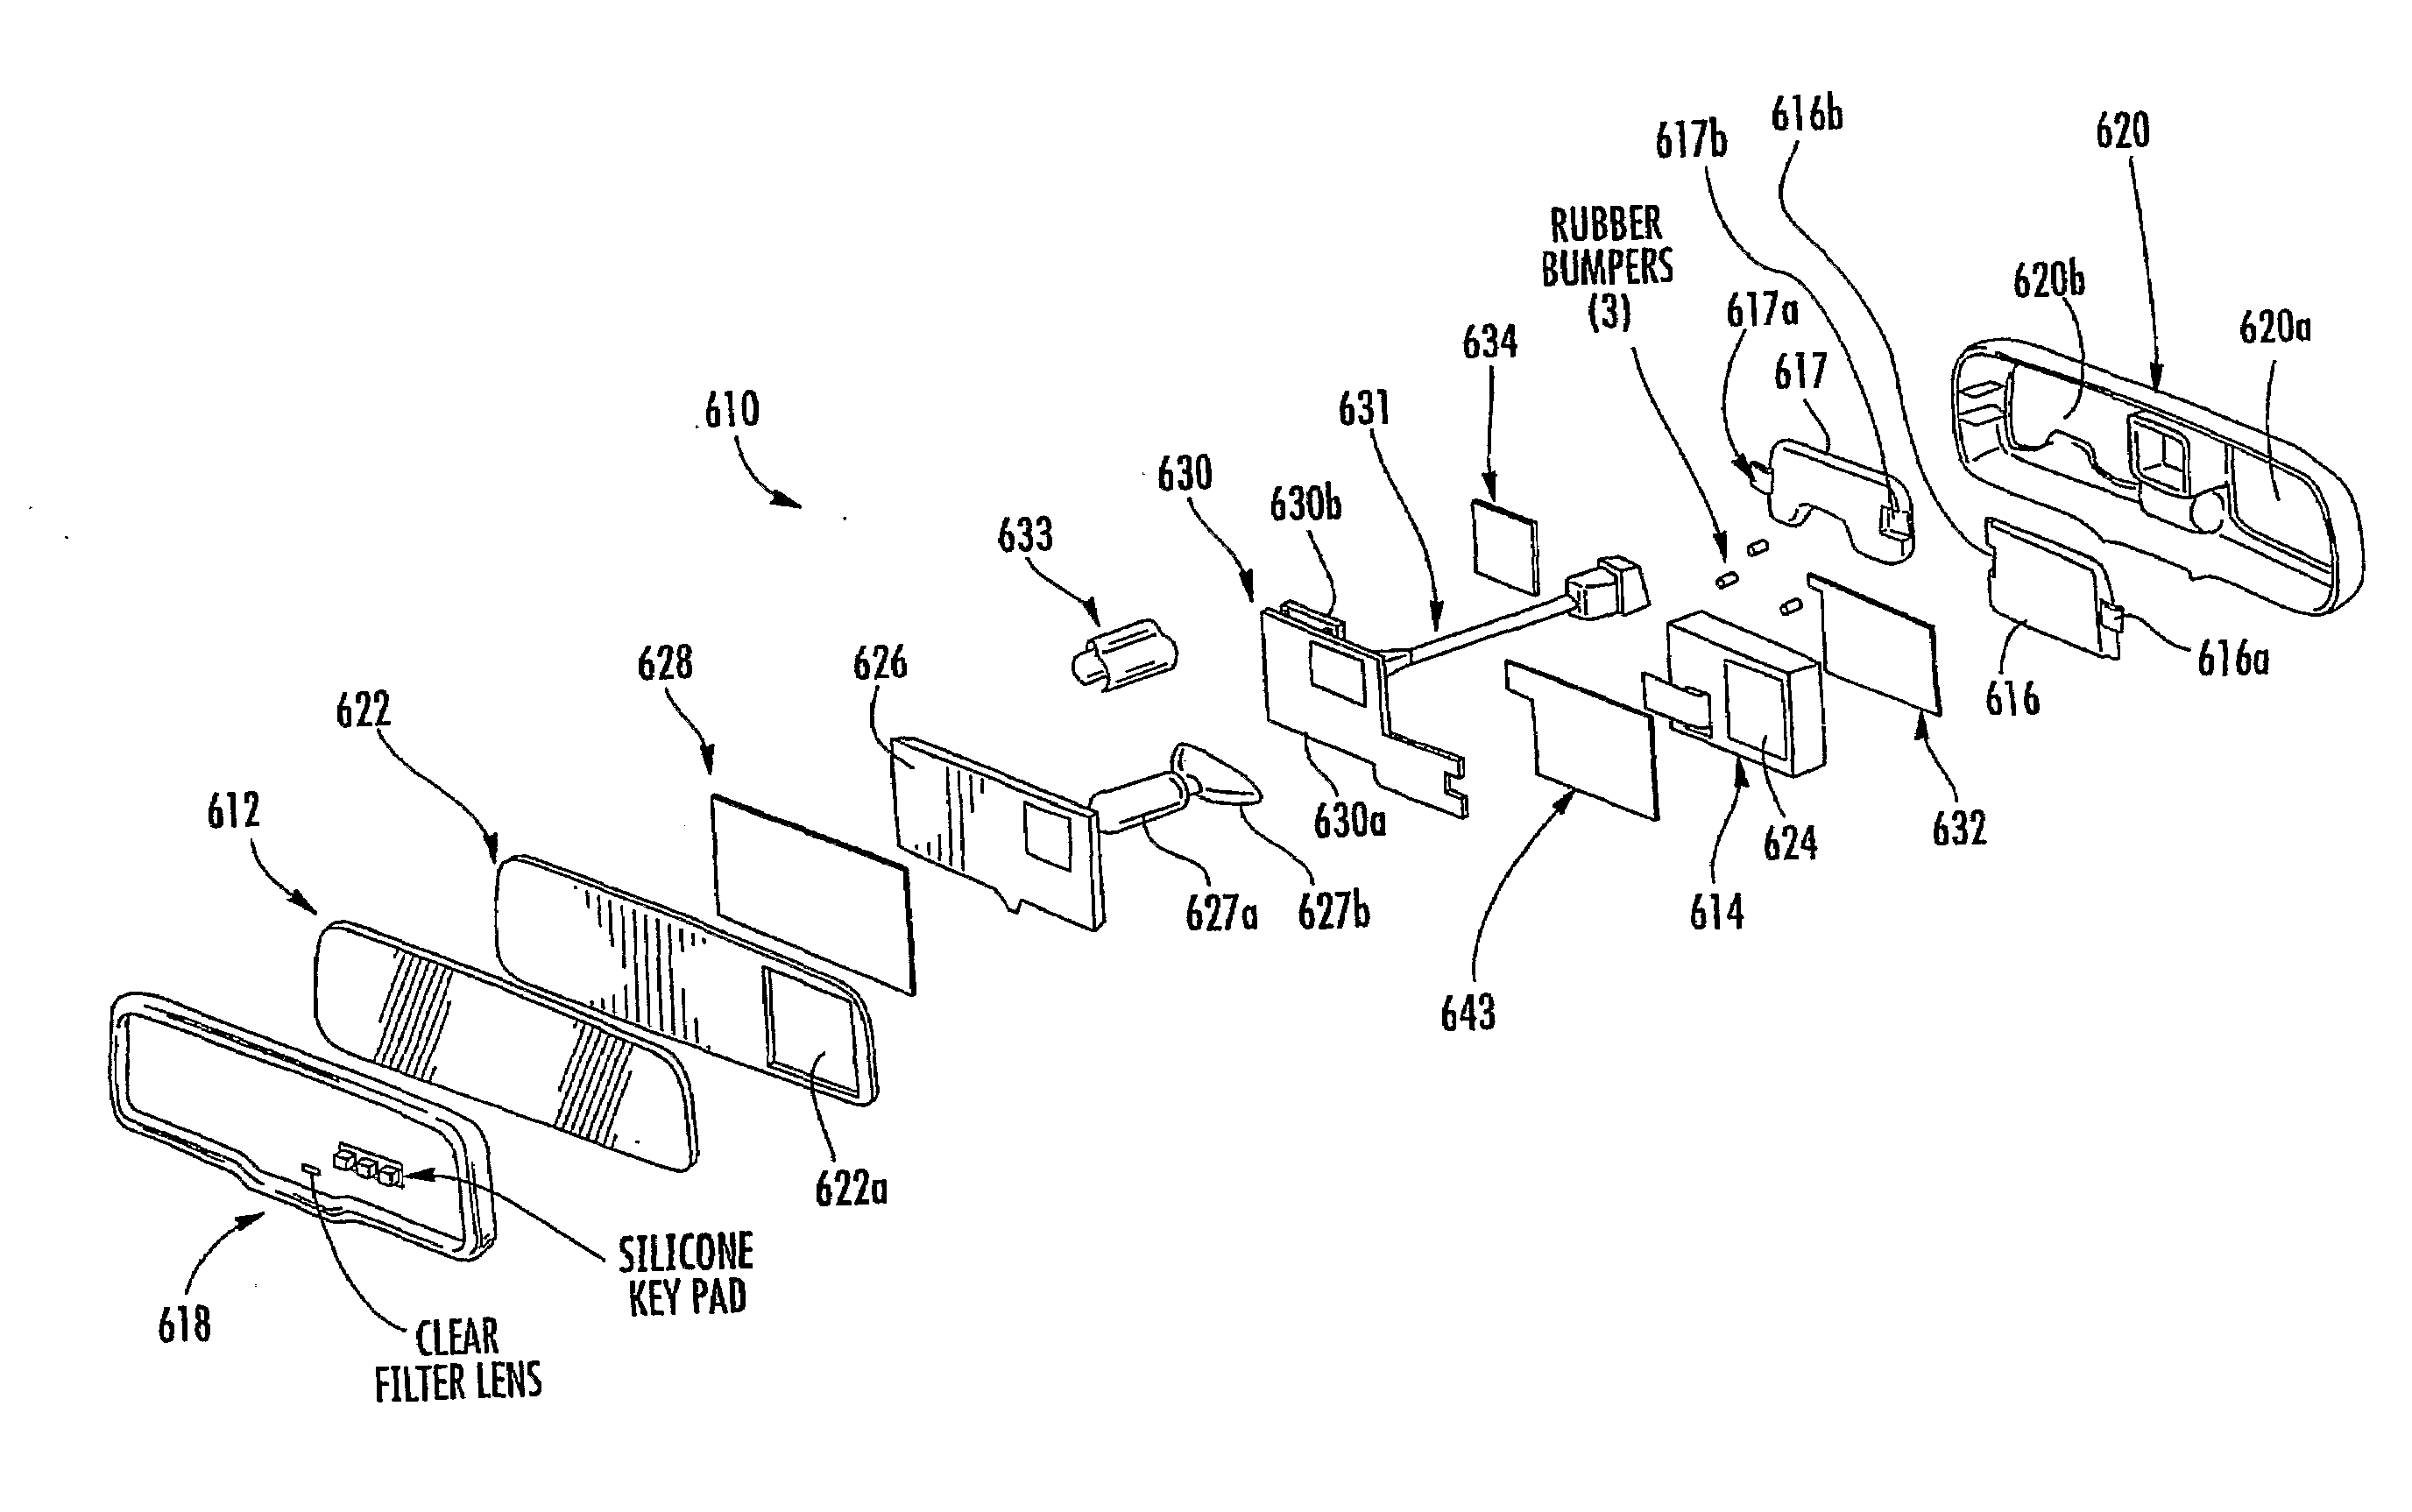 Interior rearview mirror assembly with display